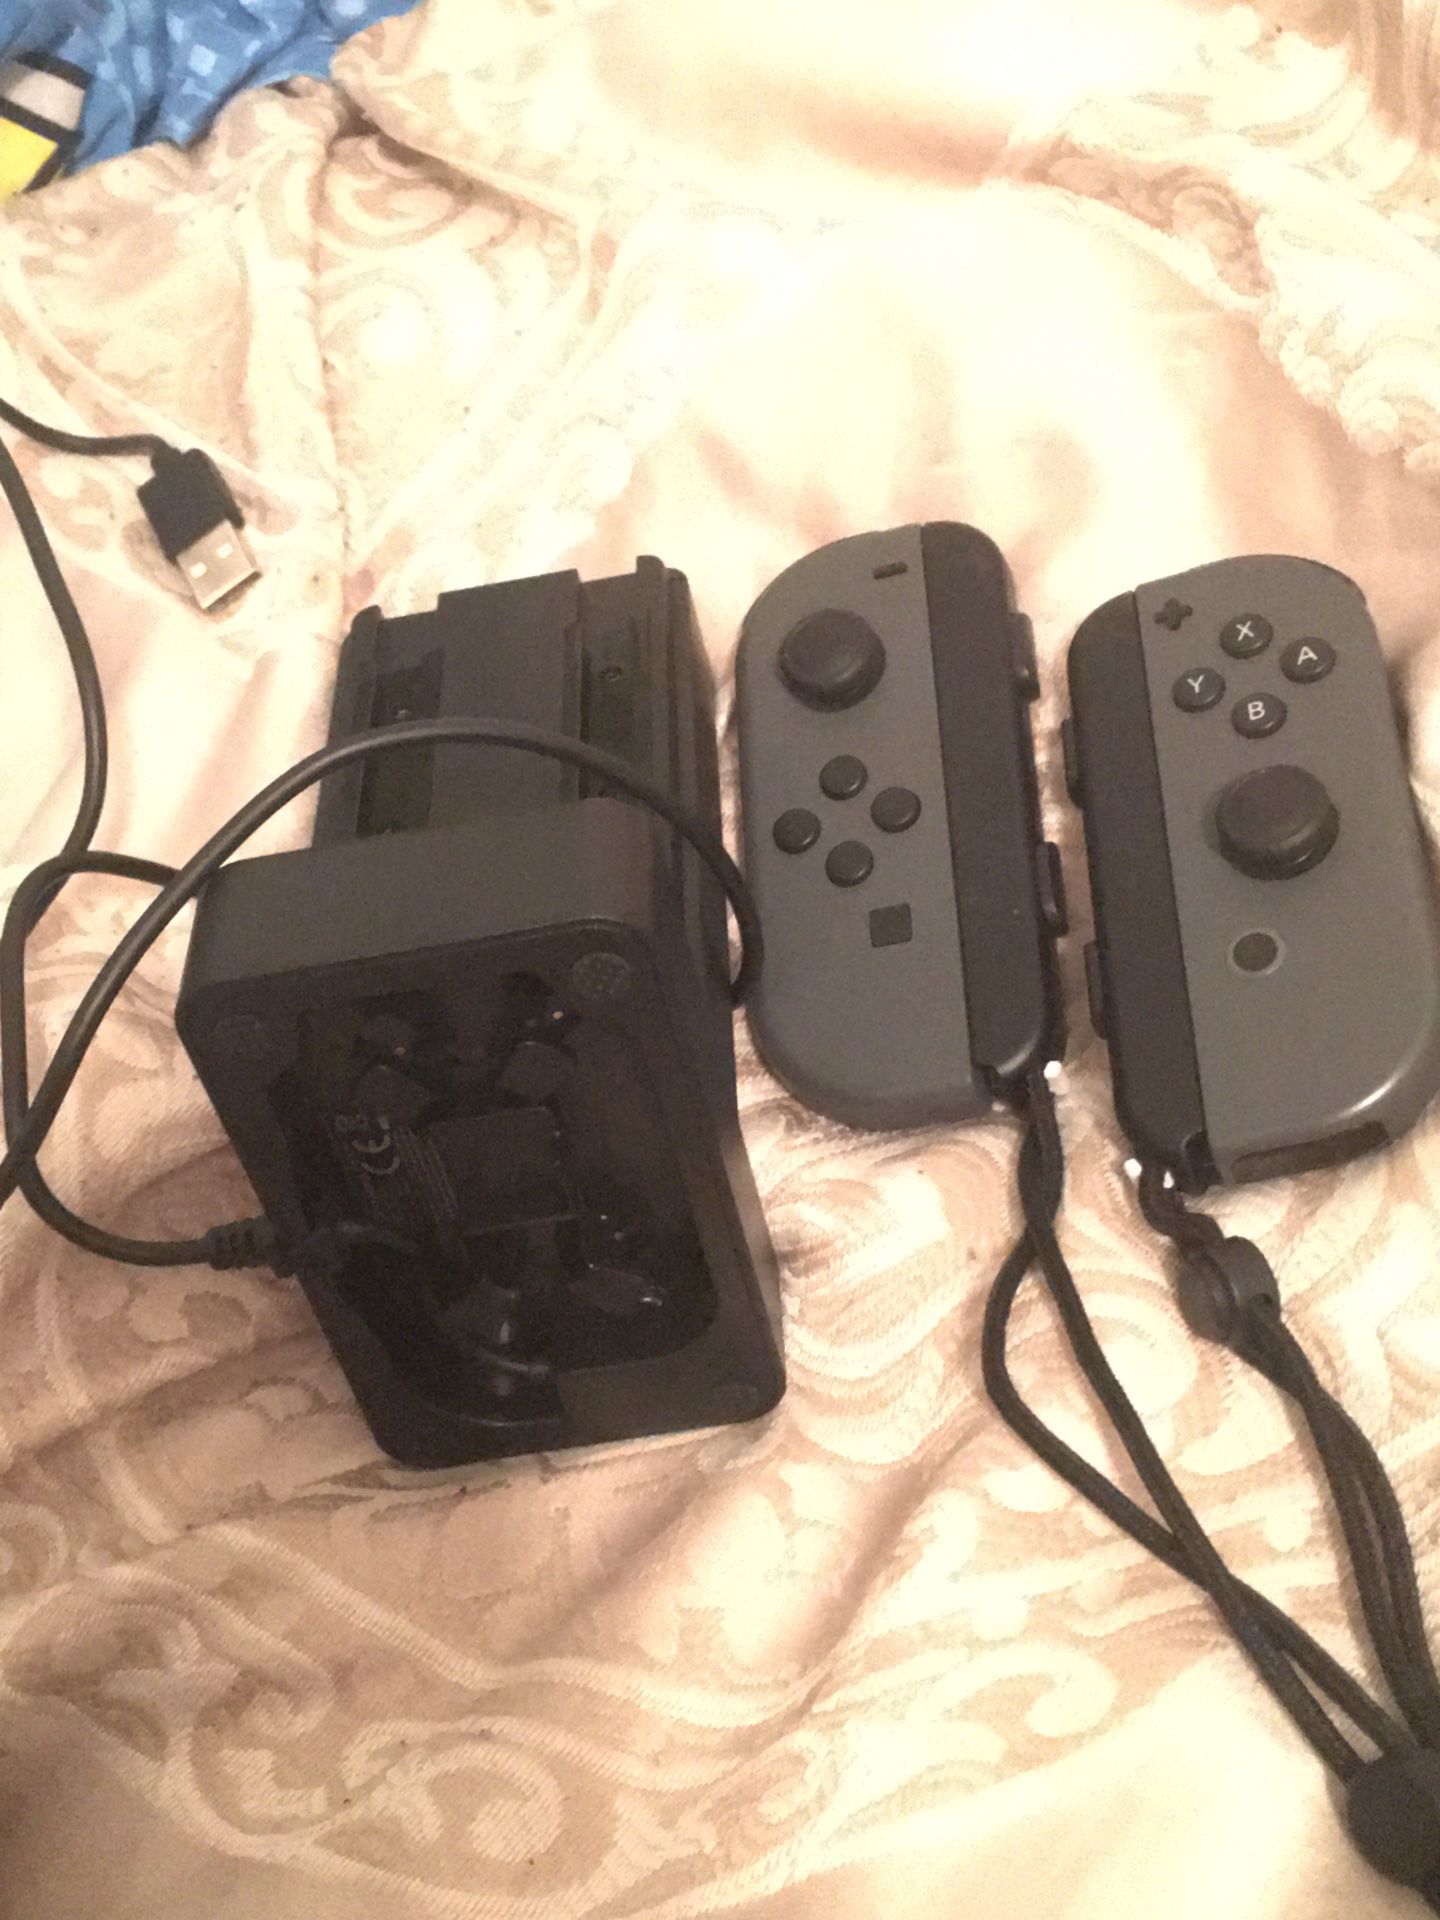 Grey Nintendo Switch joycons with four way controller charge dock